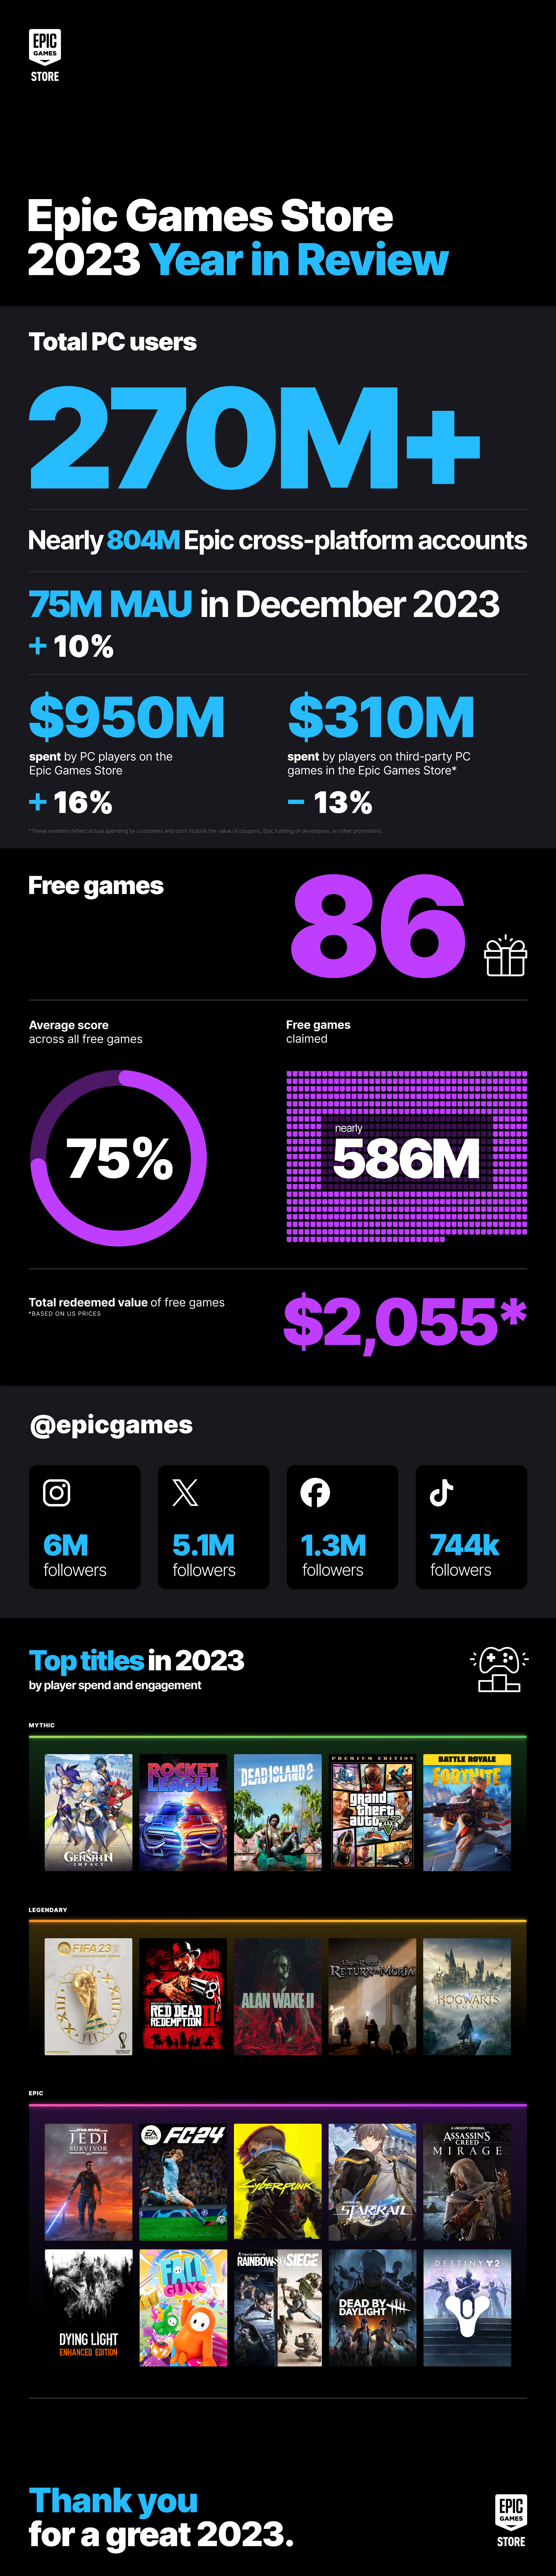 The Epic Games Store has shared some stats from 2023